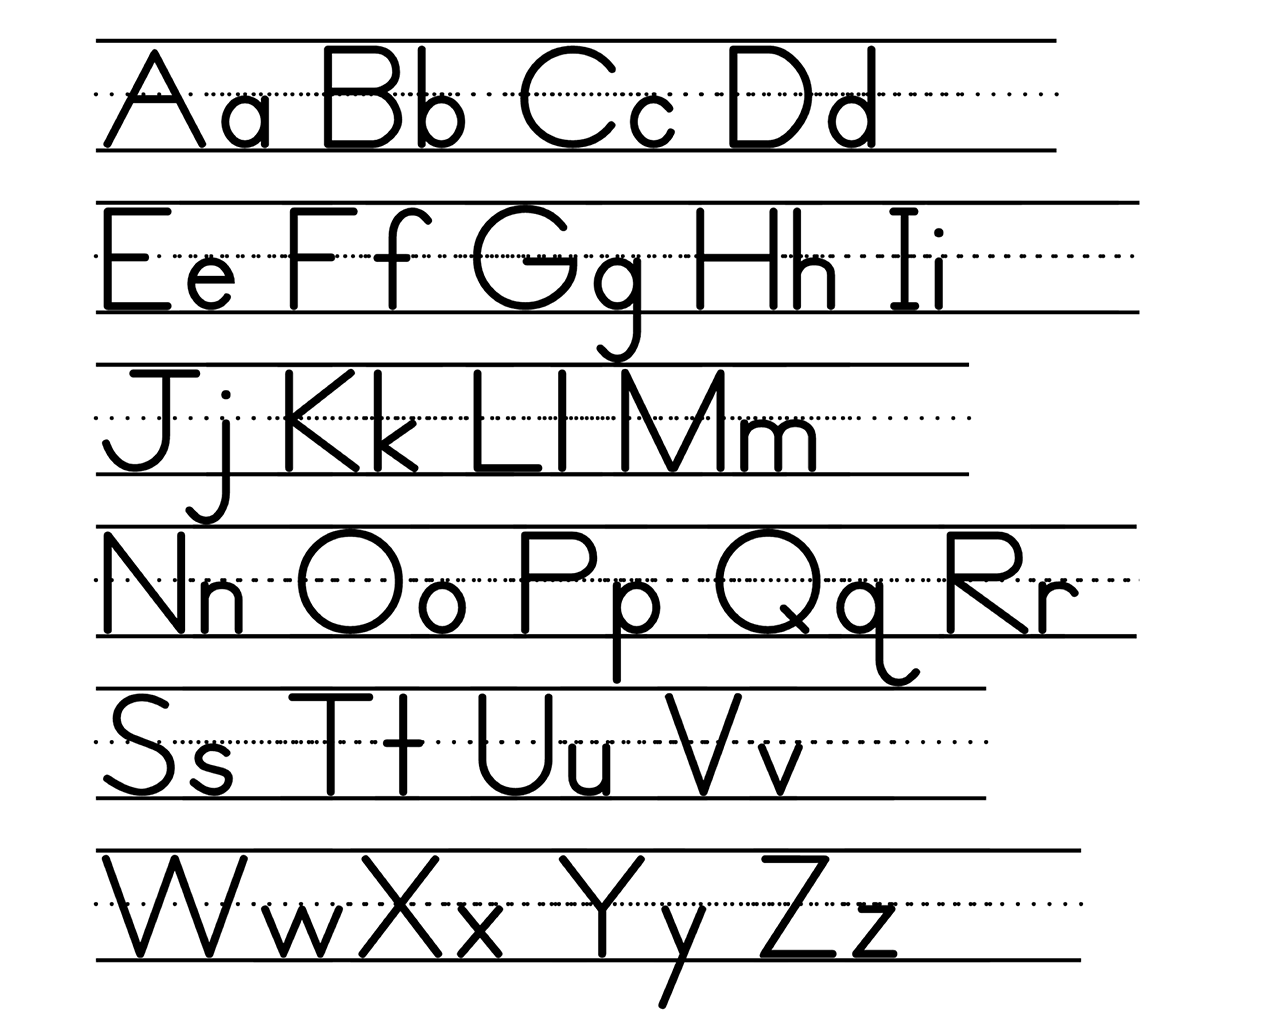 The alphabet chart, showing uppercase and lowercase letters from A to Z